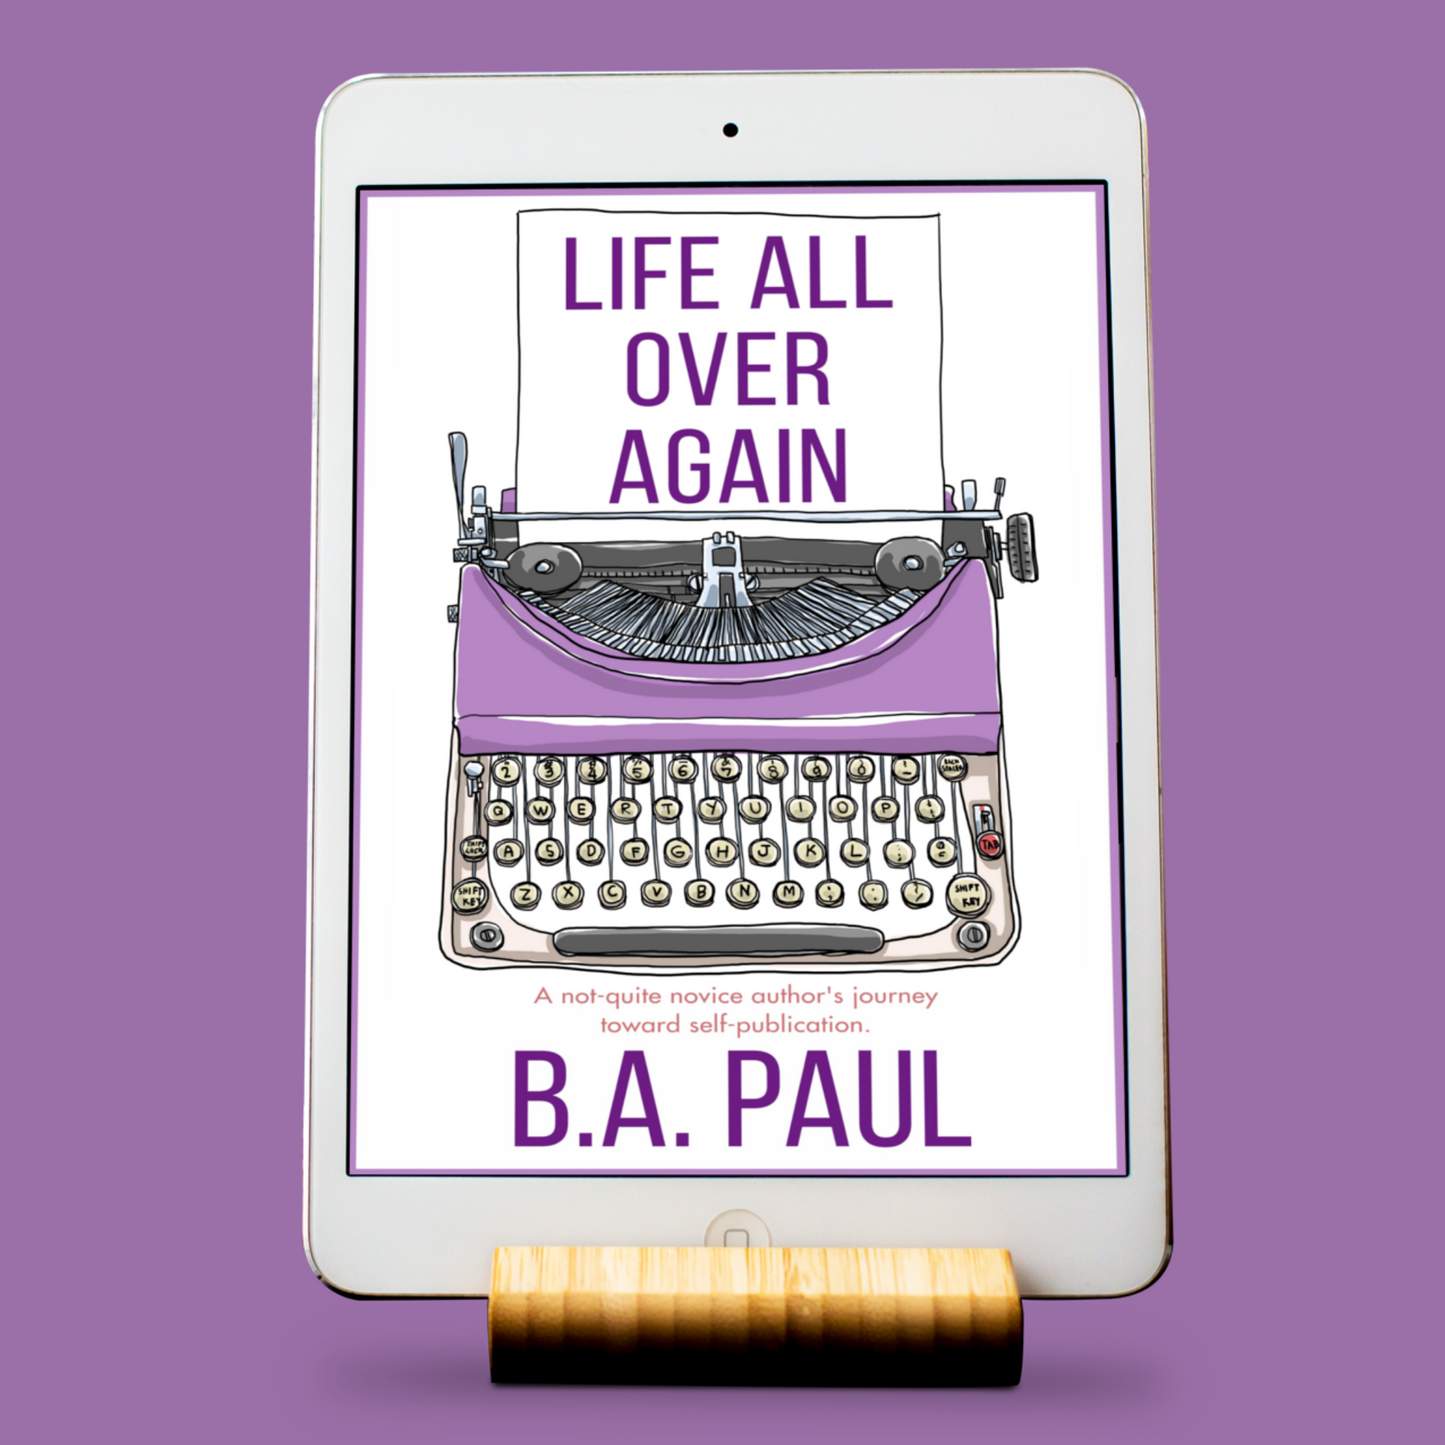 Life All Over Again: A Not-Quite Novice Author's Journey to Self-Publication, E-book